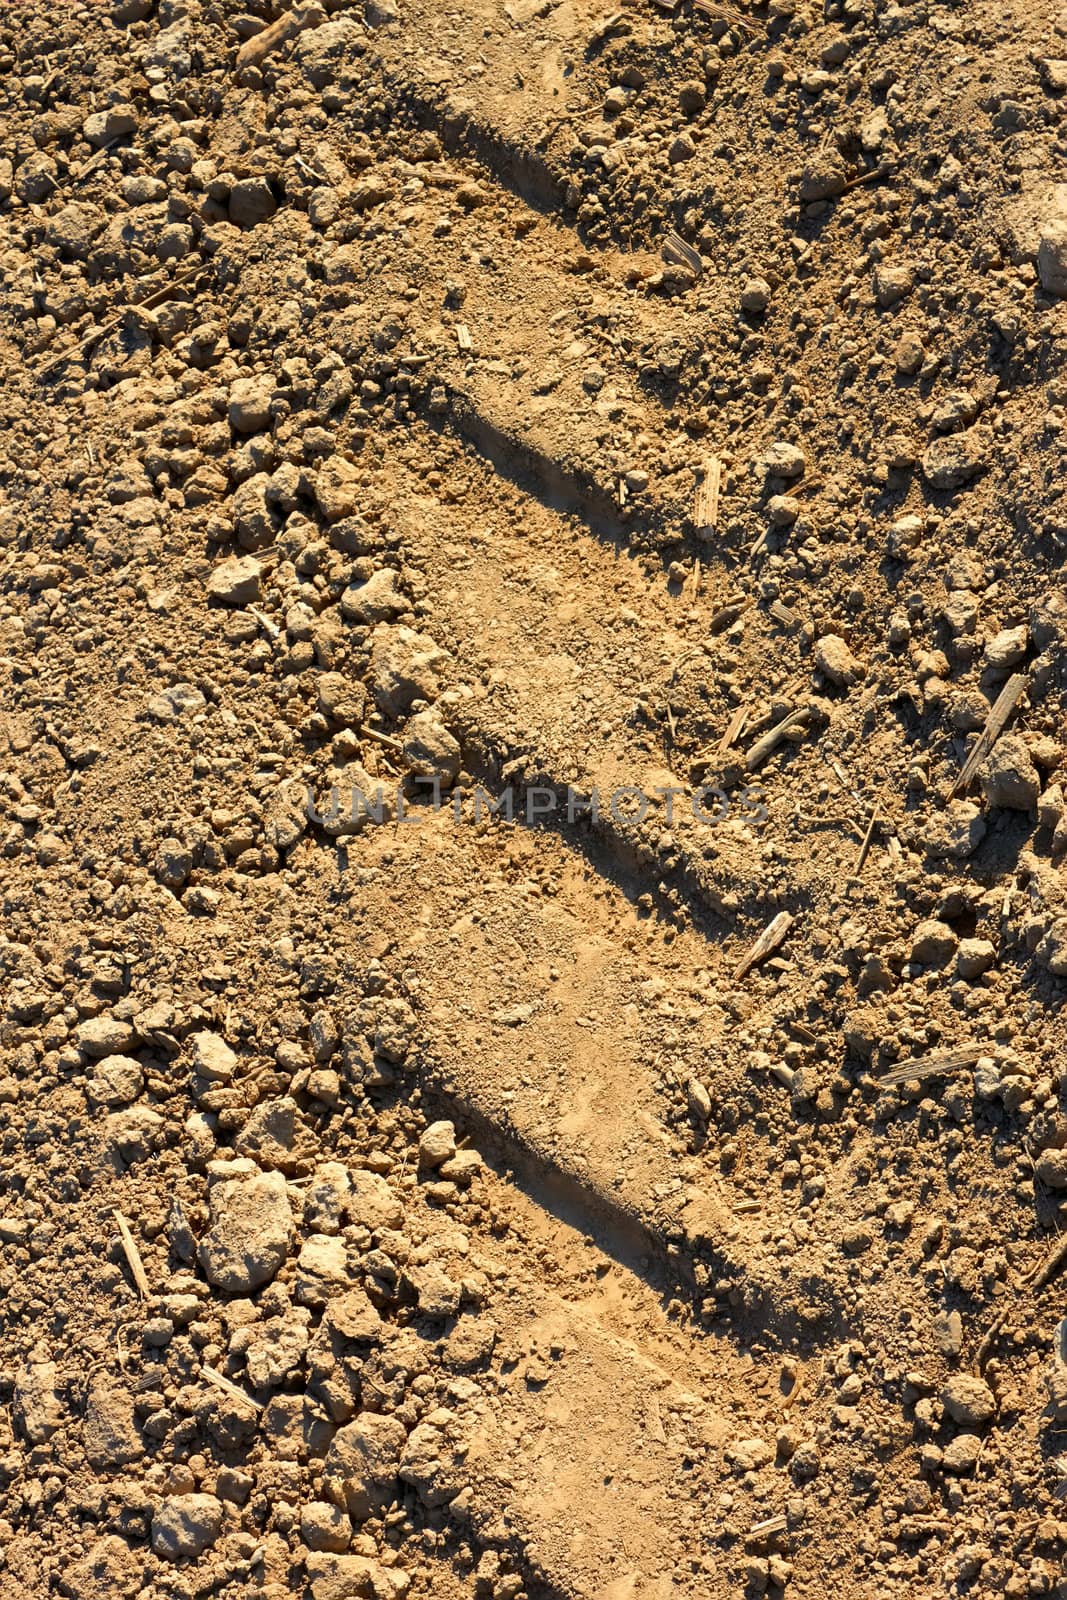 Tread pattern of a truck tire on the dried soil